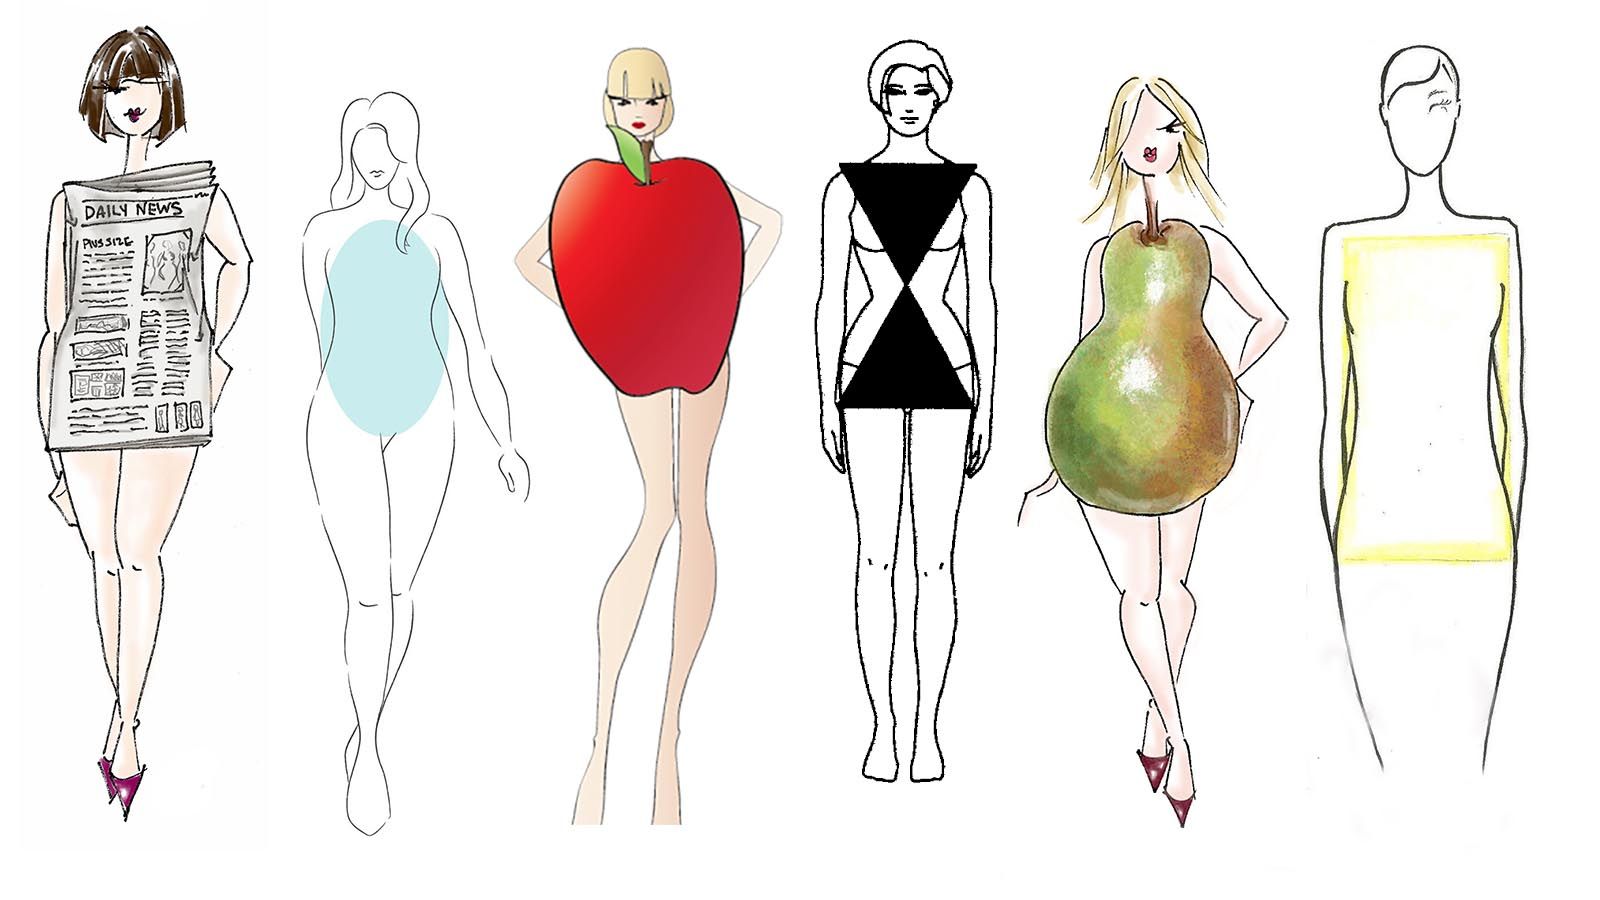 Knowing Your Body Shape is the Key to Looking Great